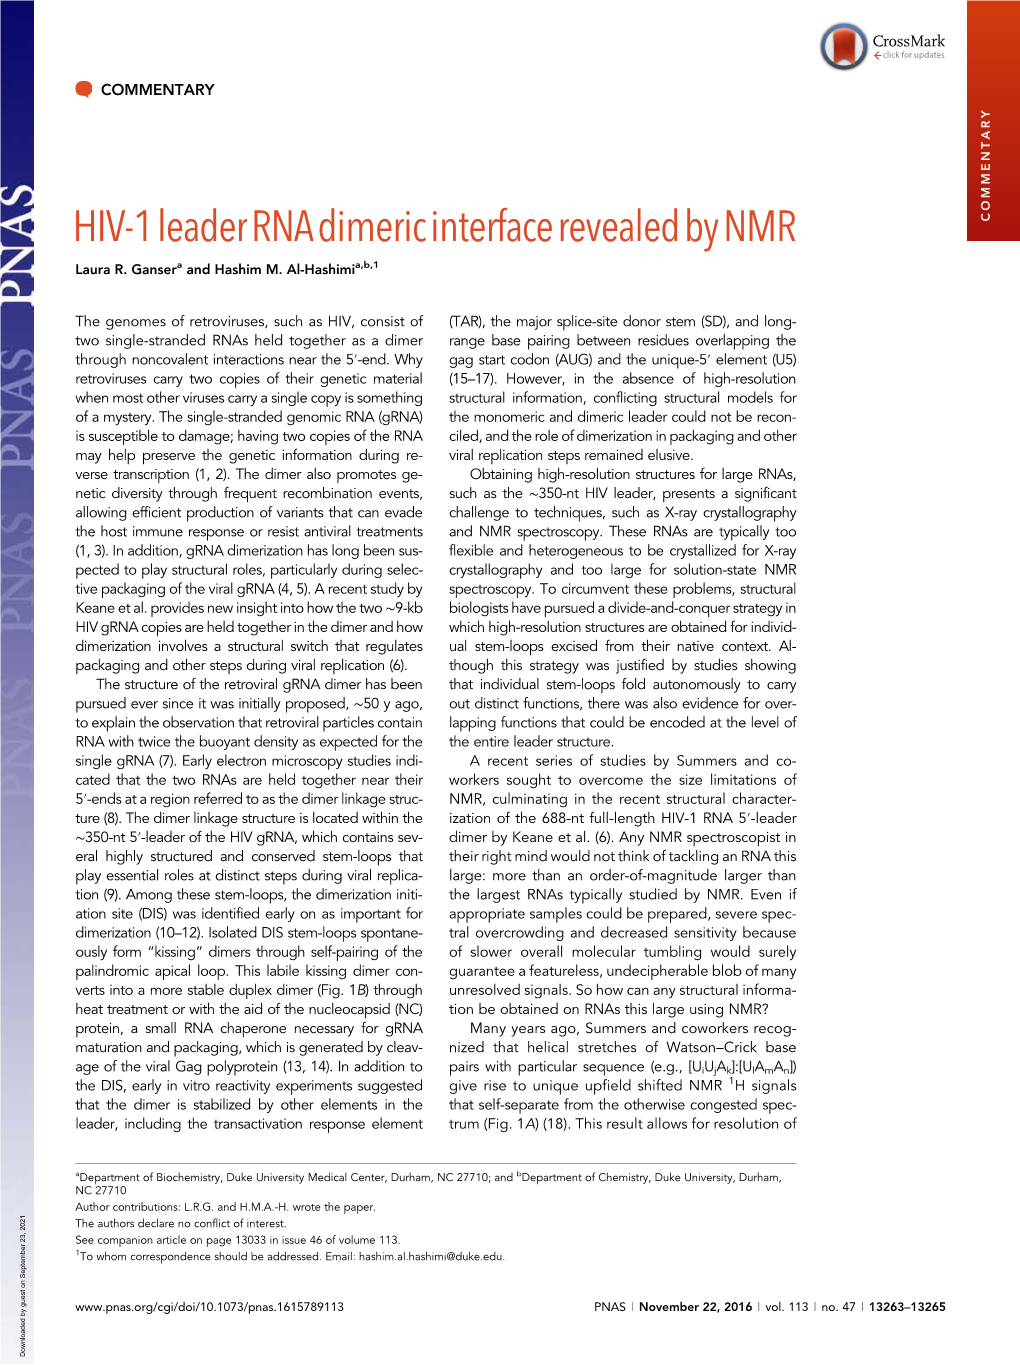 HIV-1 Leader RNA Dimeric Interface Revealed By